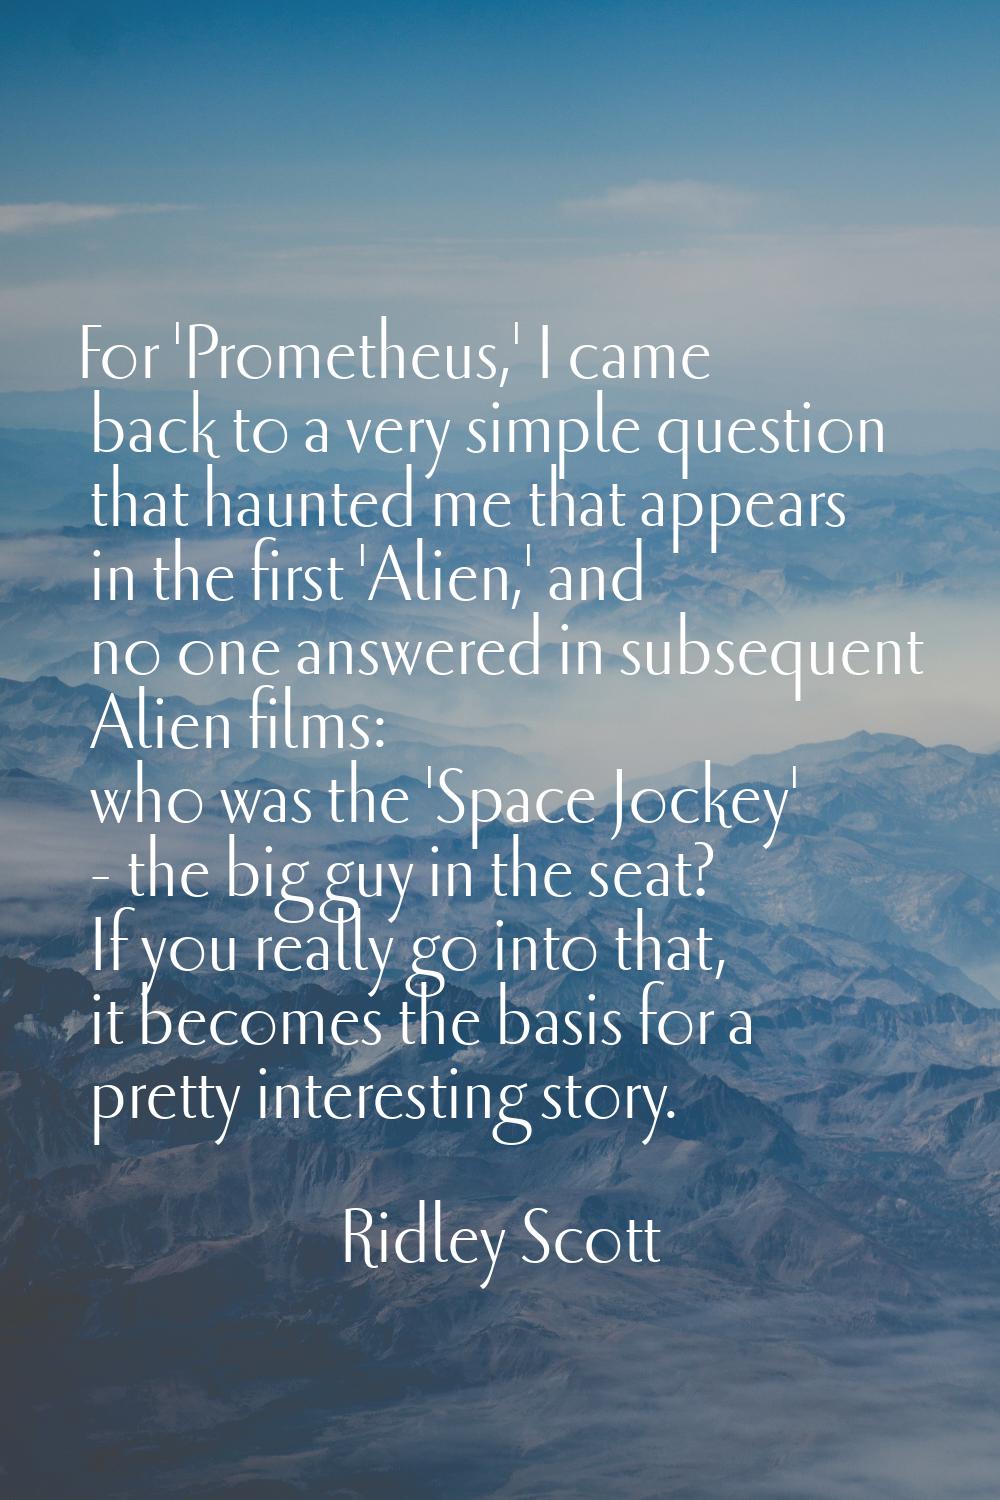 For 'Prometheus,' I came back to a very simple question that haunted me that appears in the first '